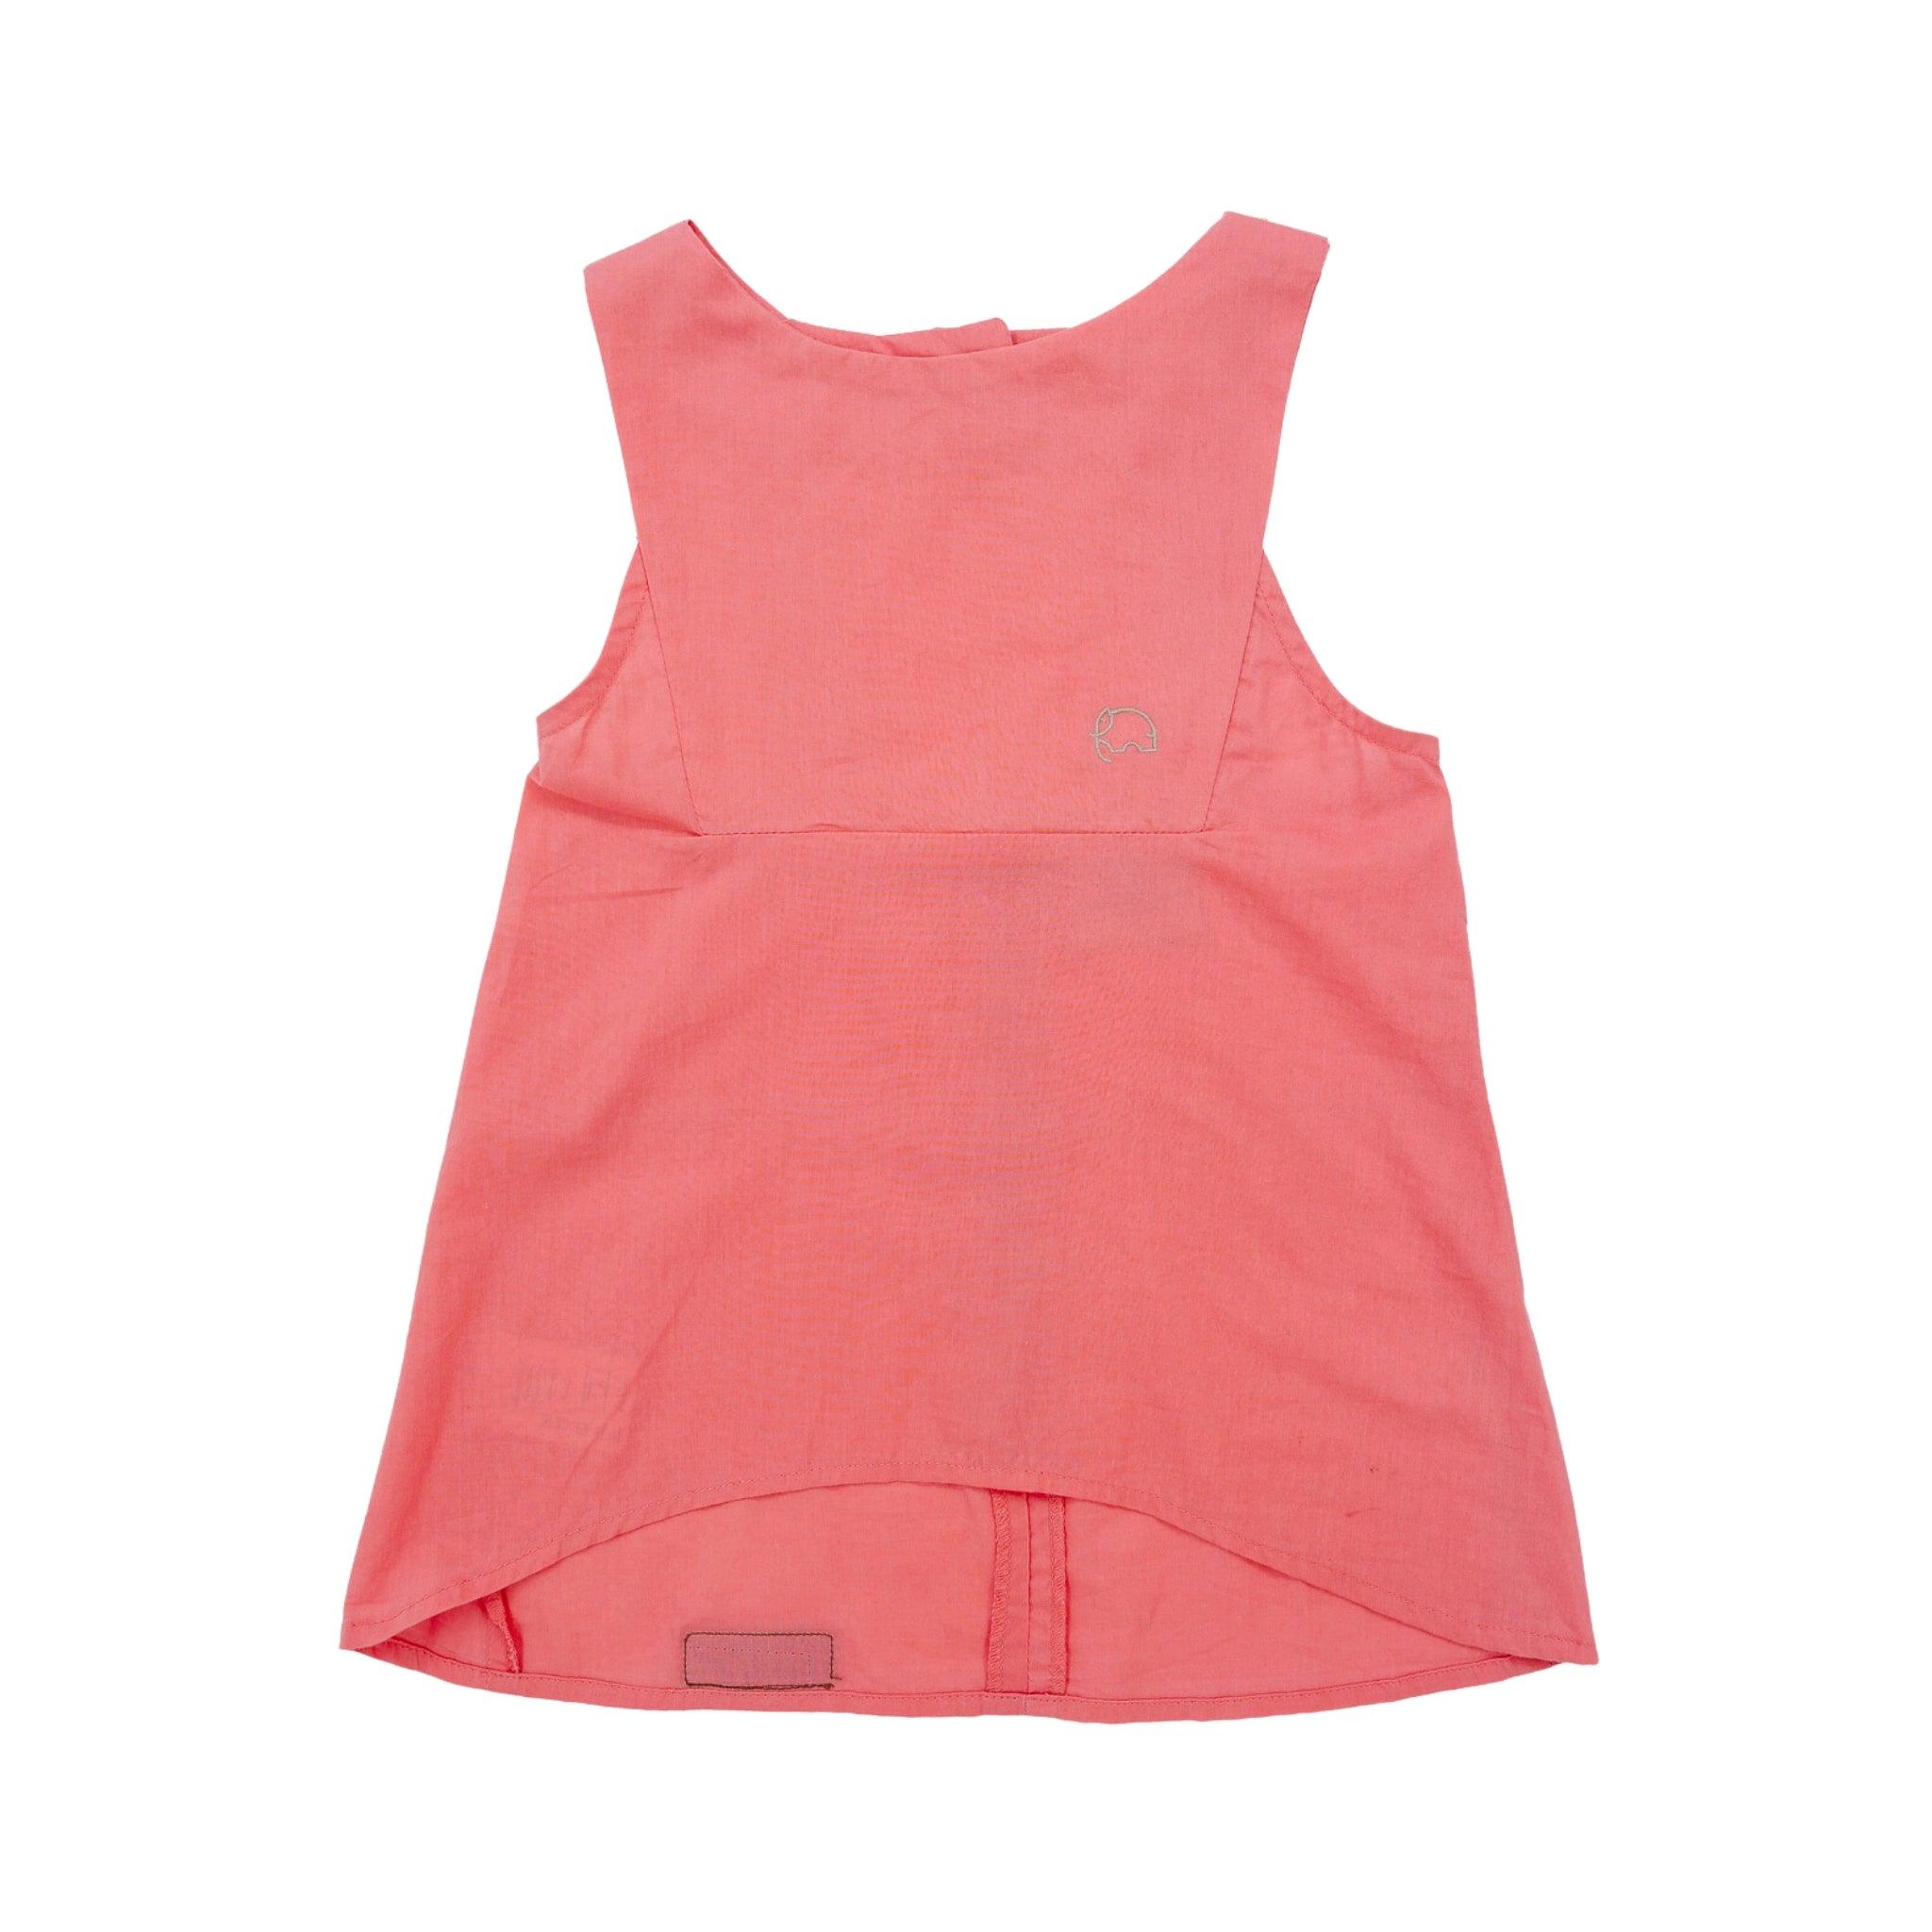 A sleeveless Tea Rose Cotton Bib Neck Top for kids with a breathable high-low hemline, displayed against a white background by Karee.